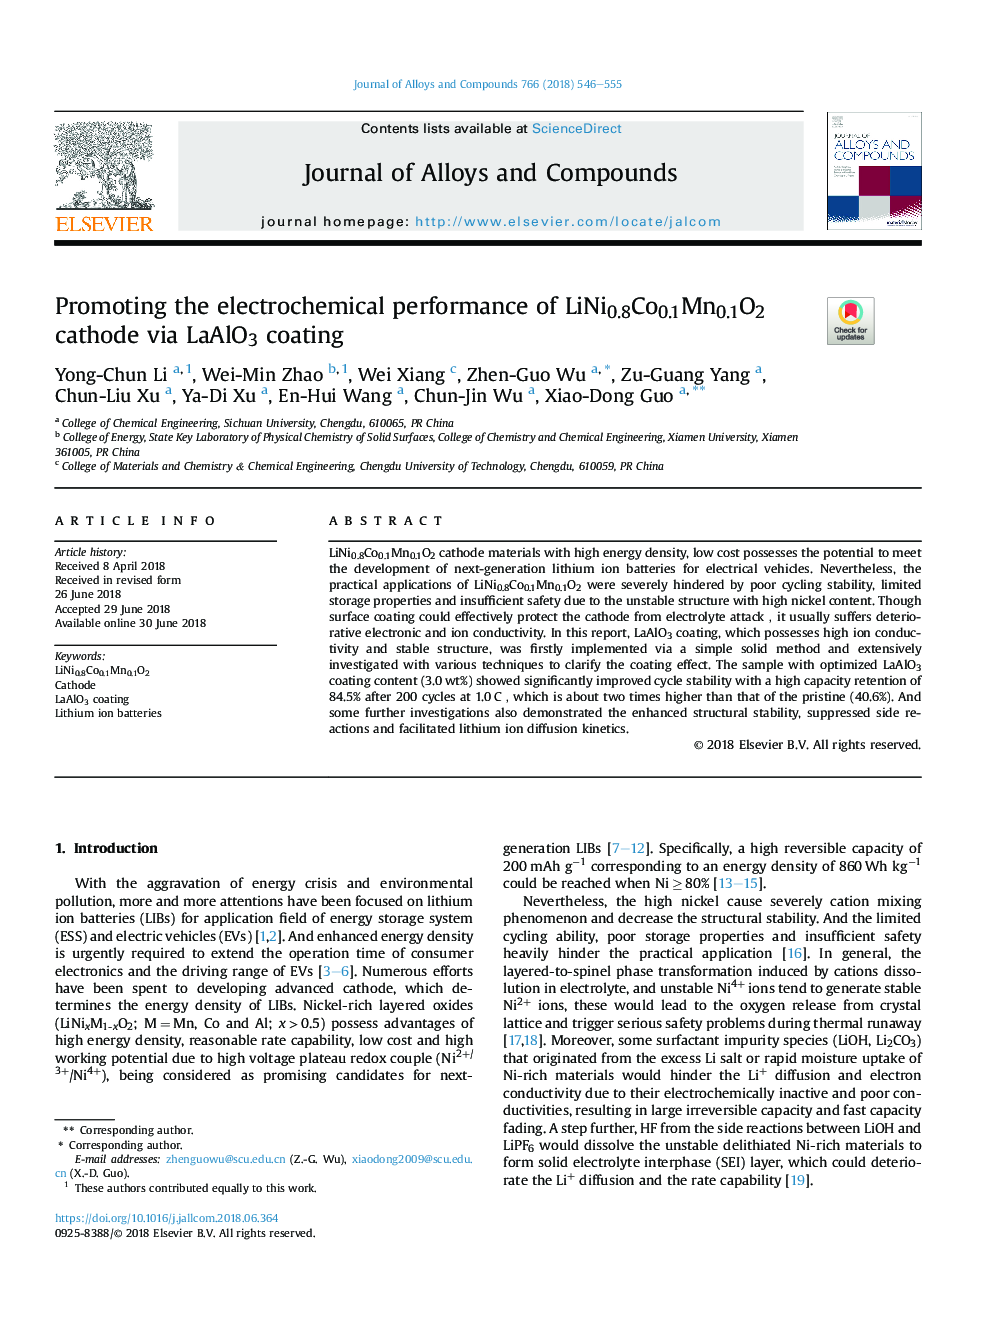 Promoting the electrochemical performance of LiNi0.8Co0.1Mn0.1O2 cathode via LaAlO3 coating